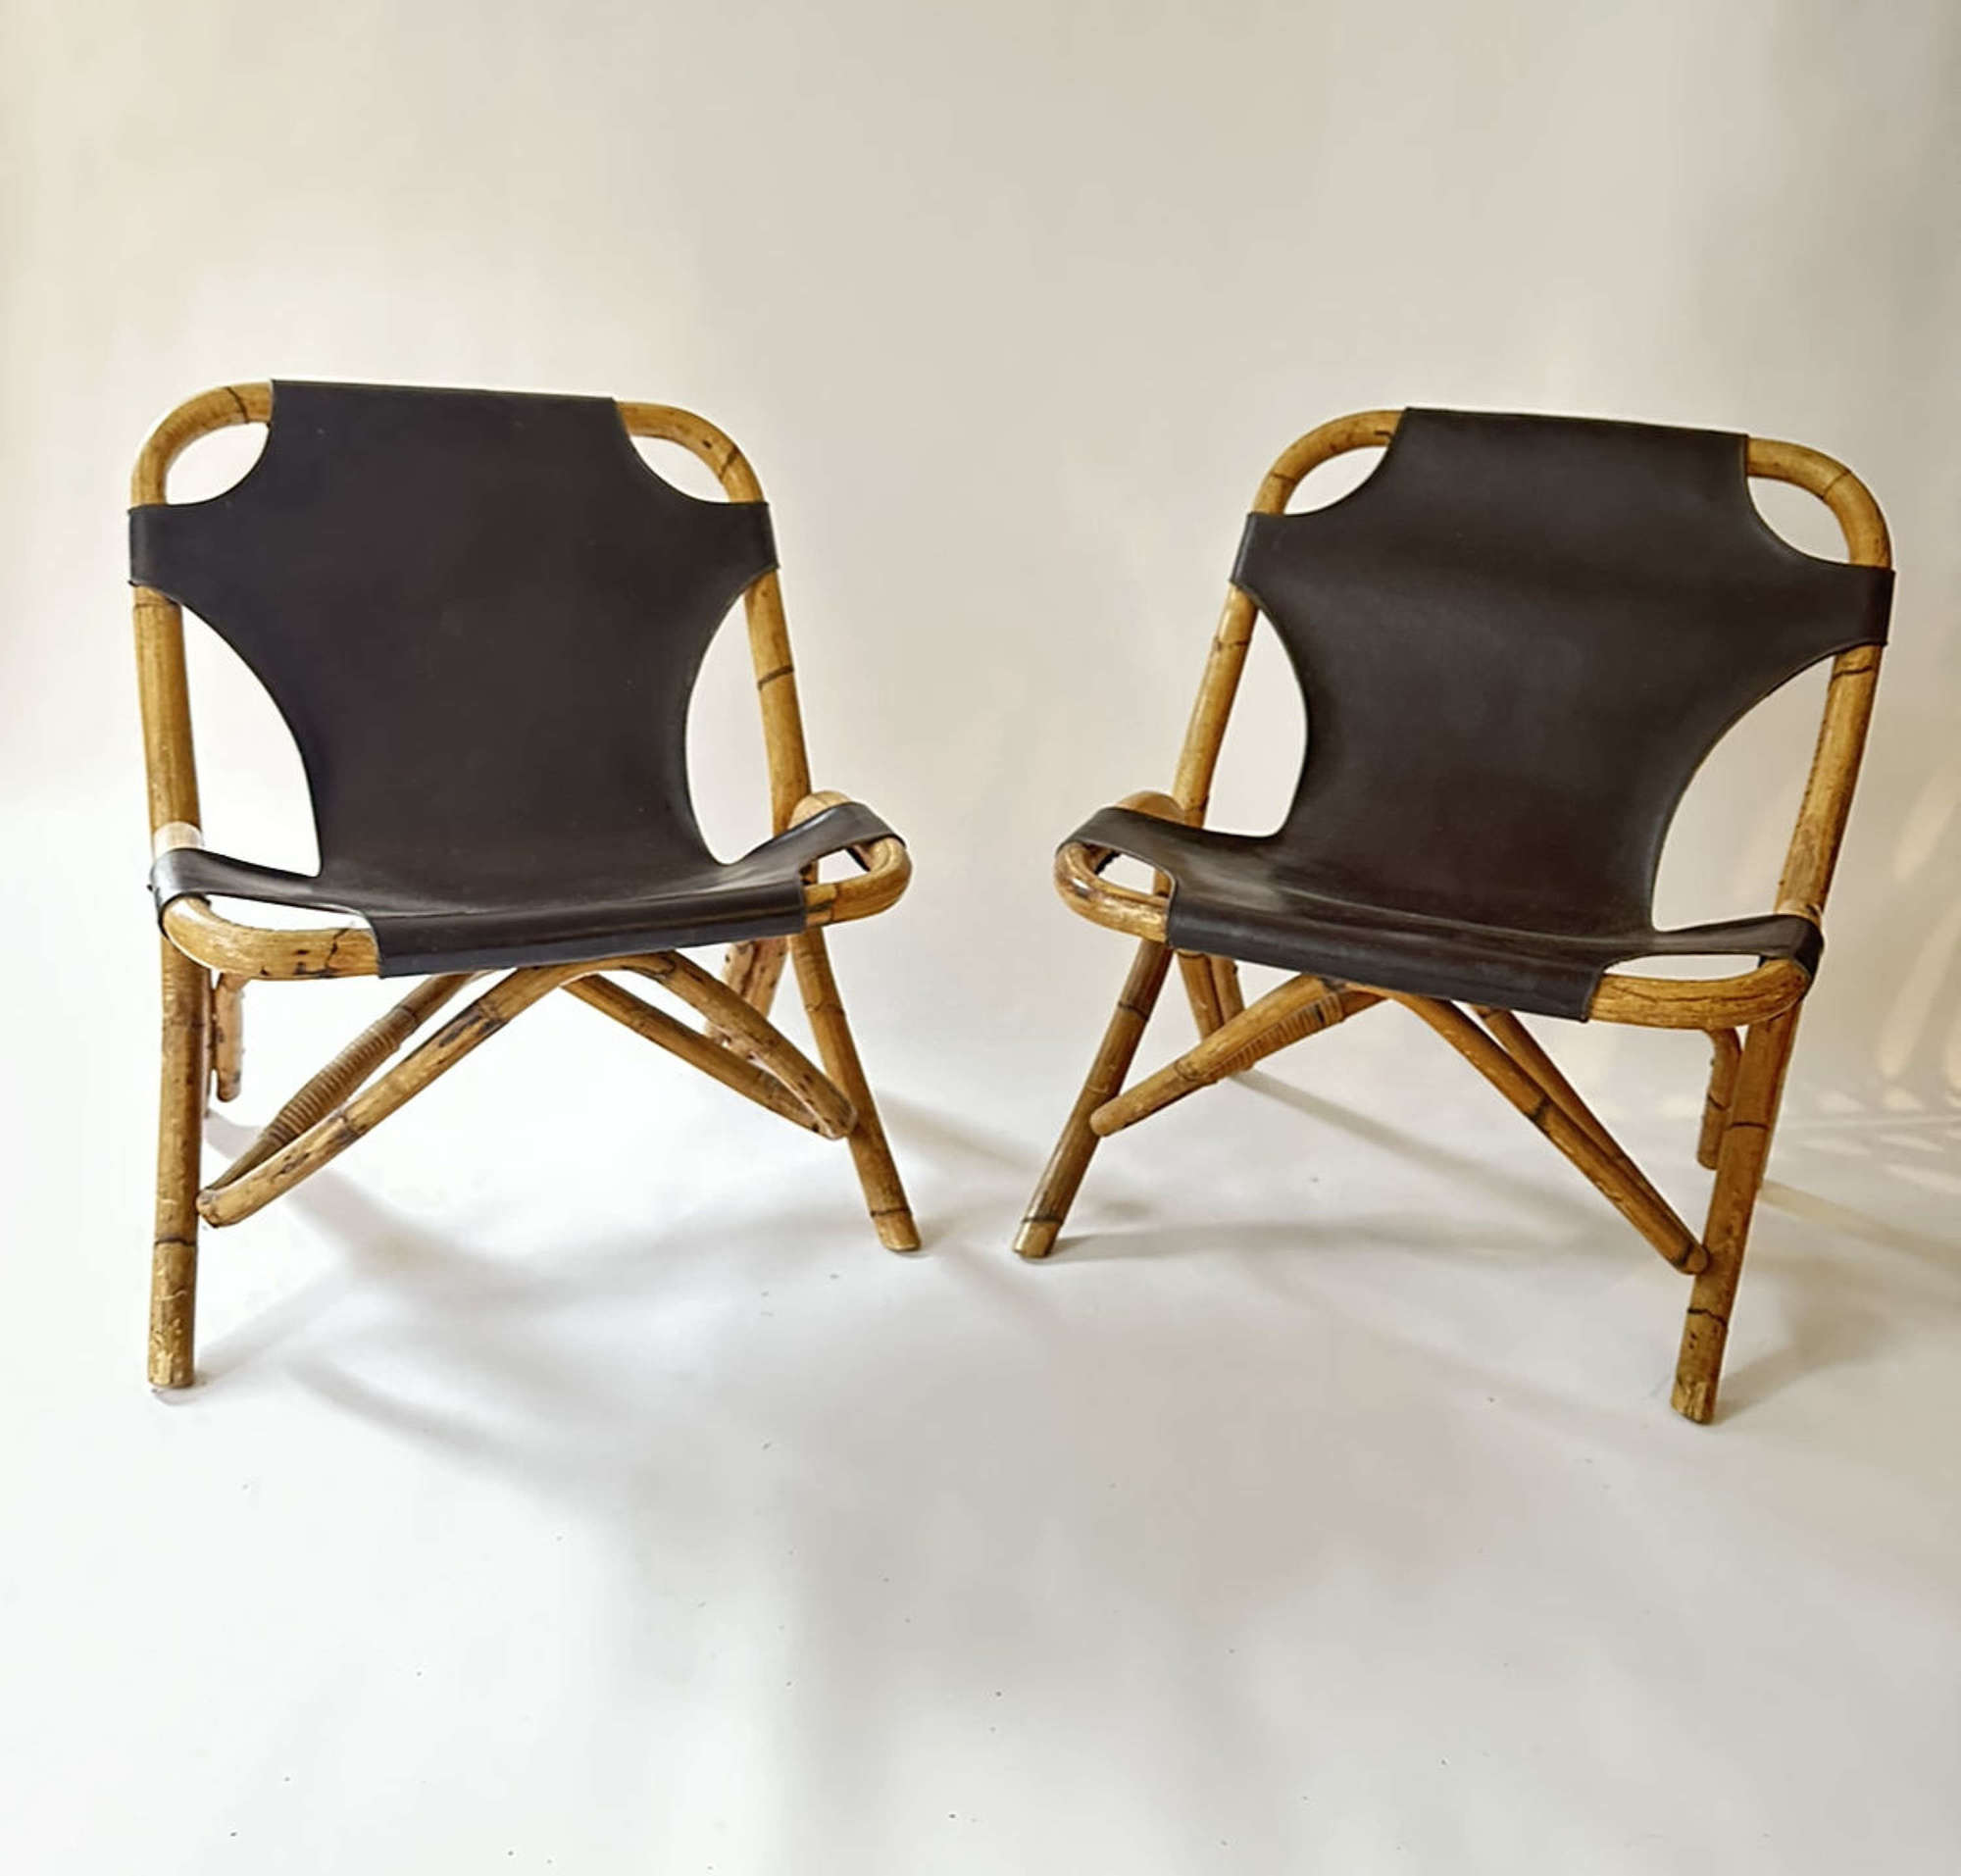 Pair of Leather & Bamboo Chairs - Italy 60s